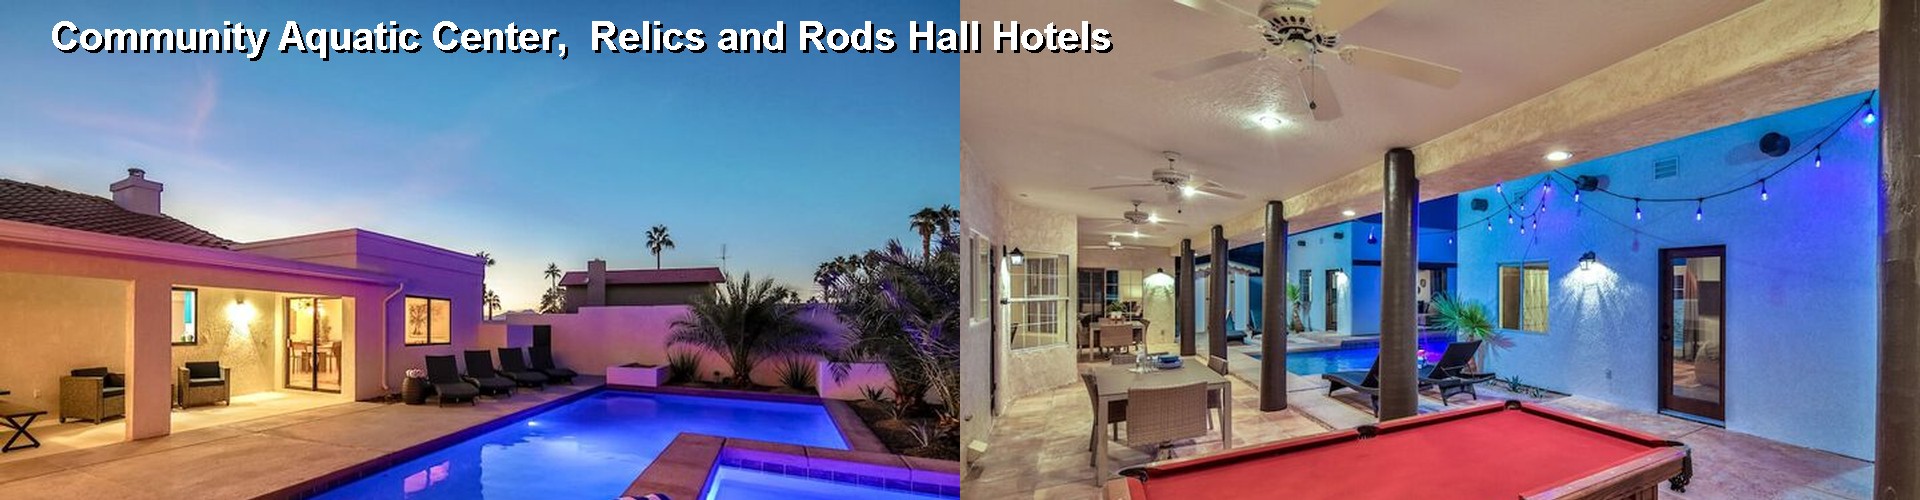 4 Best Hotels near Community Aquatic Center,  Relics and Rods Hall